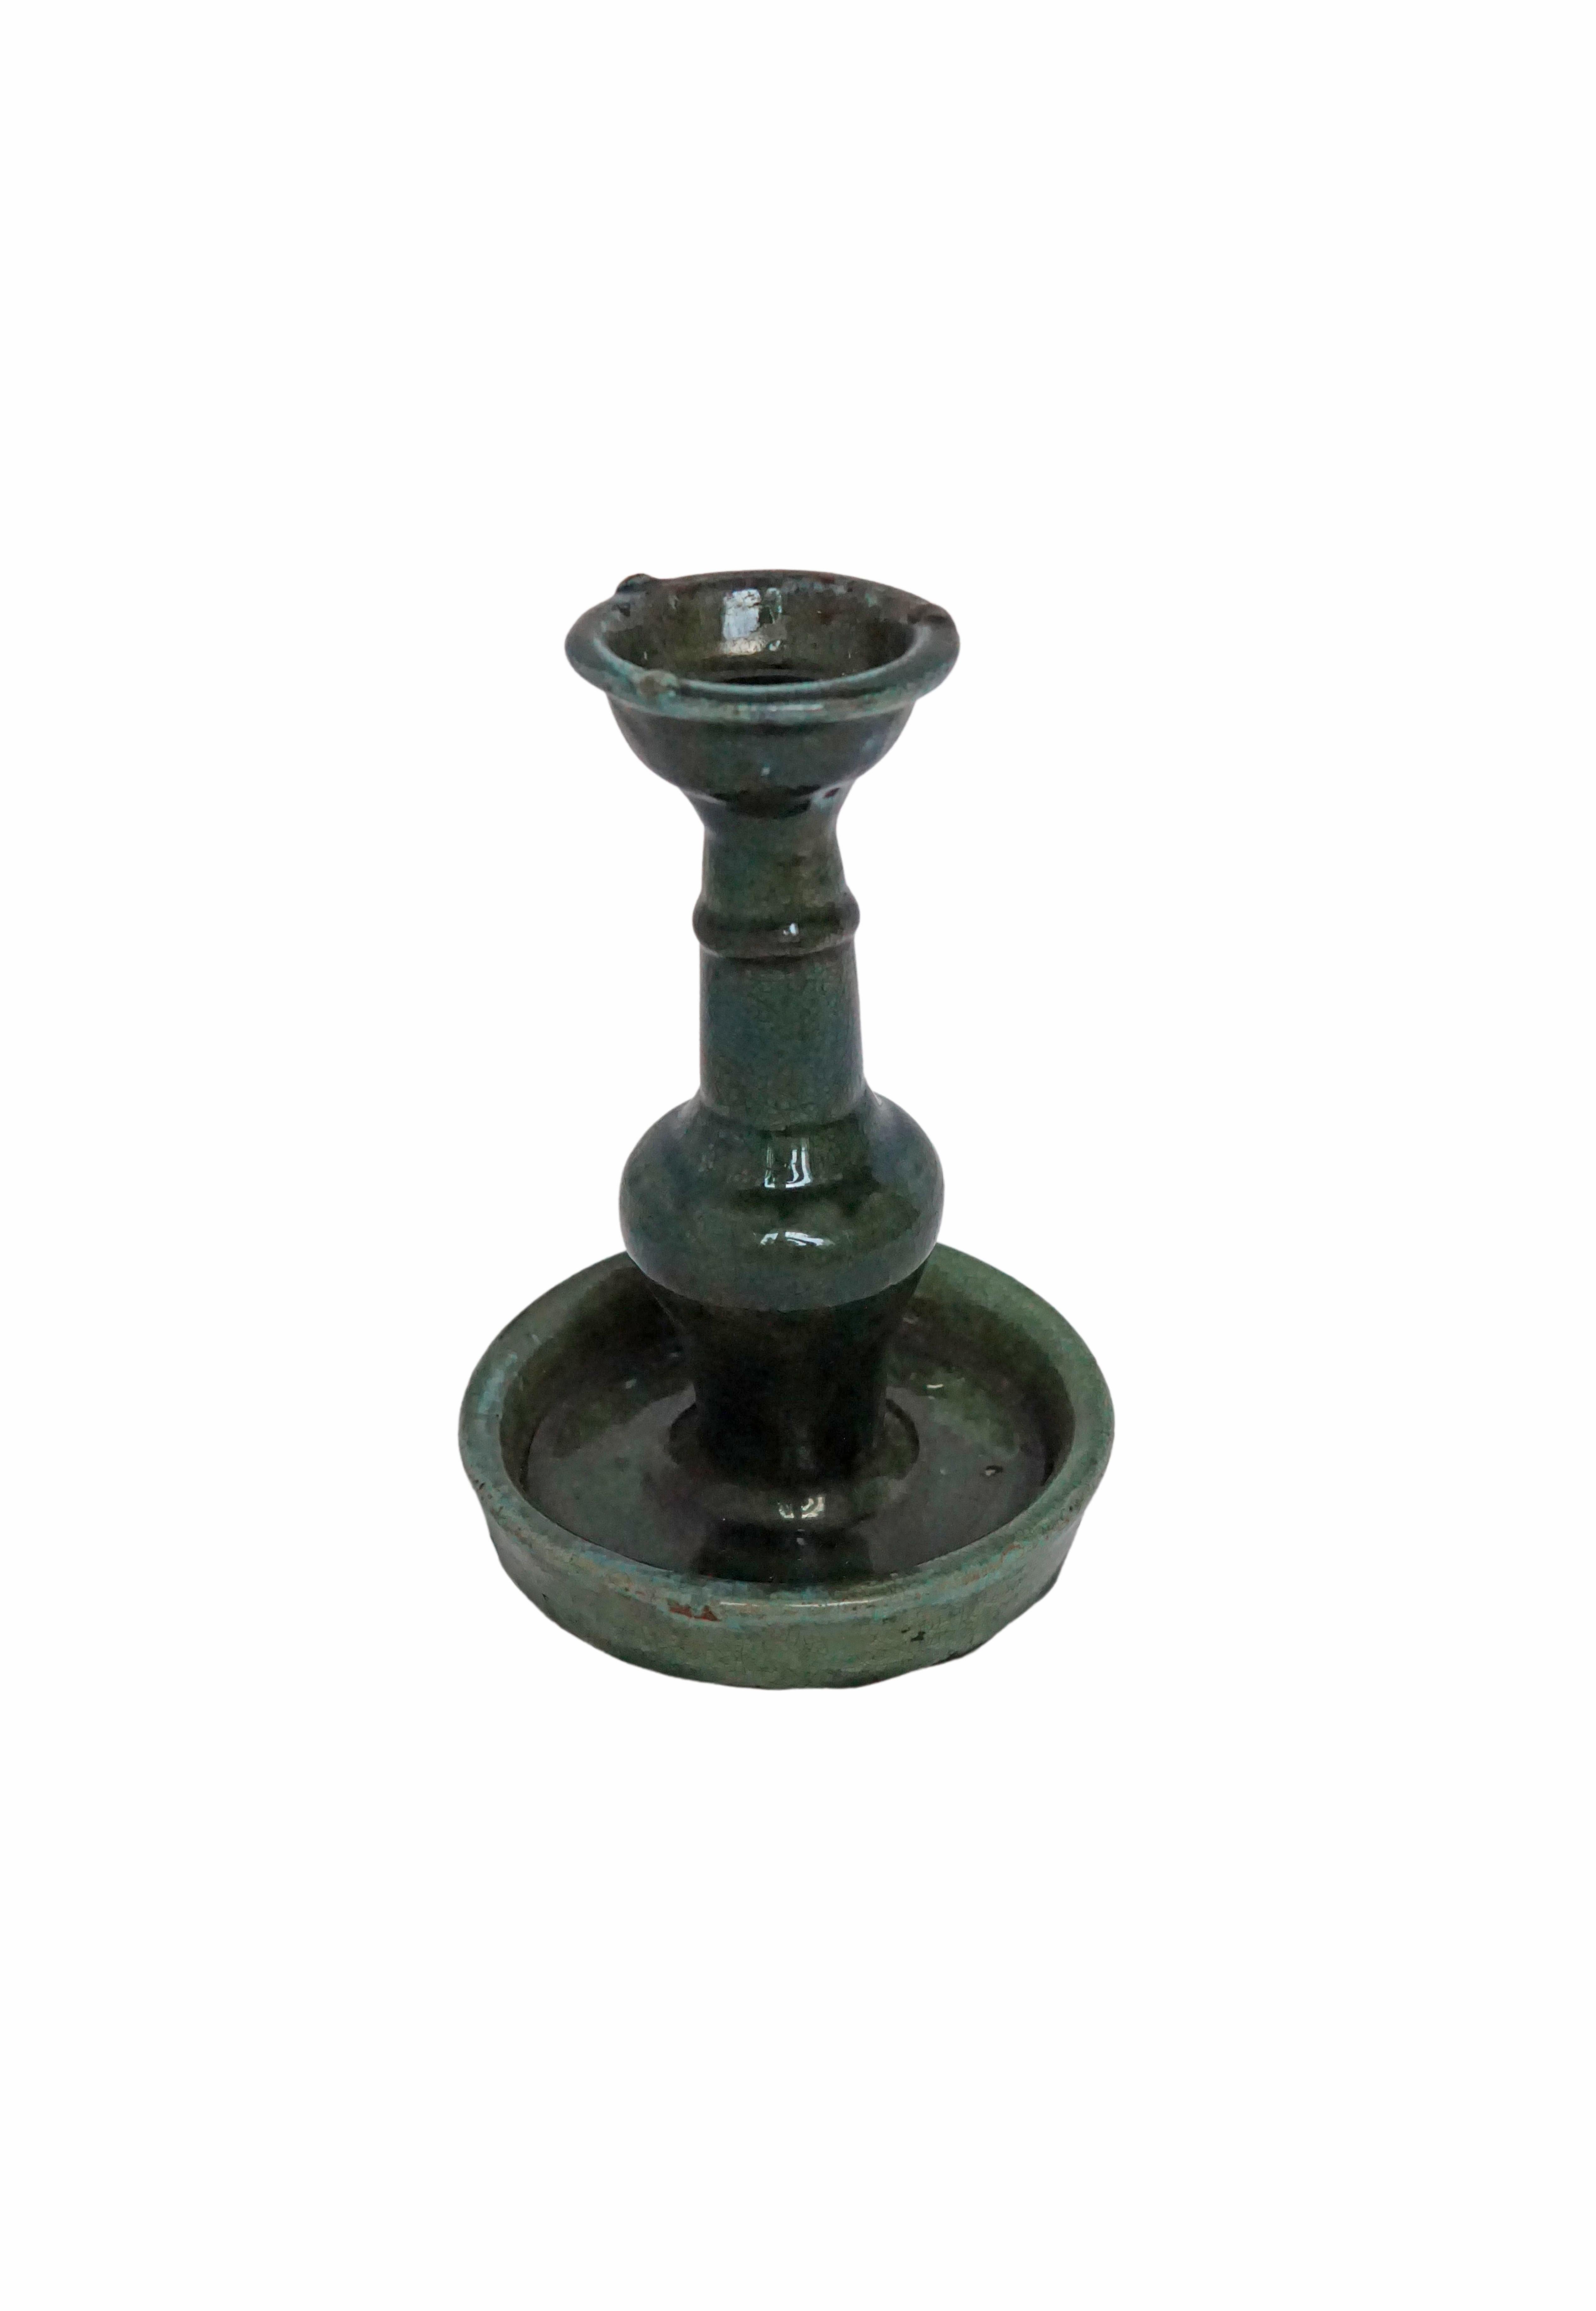 This Shiwan ware oil lamp from the early 20th century features a green glaze. Shiwan ware is a style of Chinese pottery from the Shiwanzhen district near Guangdong, China. A elegant decorative object or candleholder. 

Measures: Diameter 13.5 cm